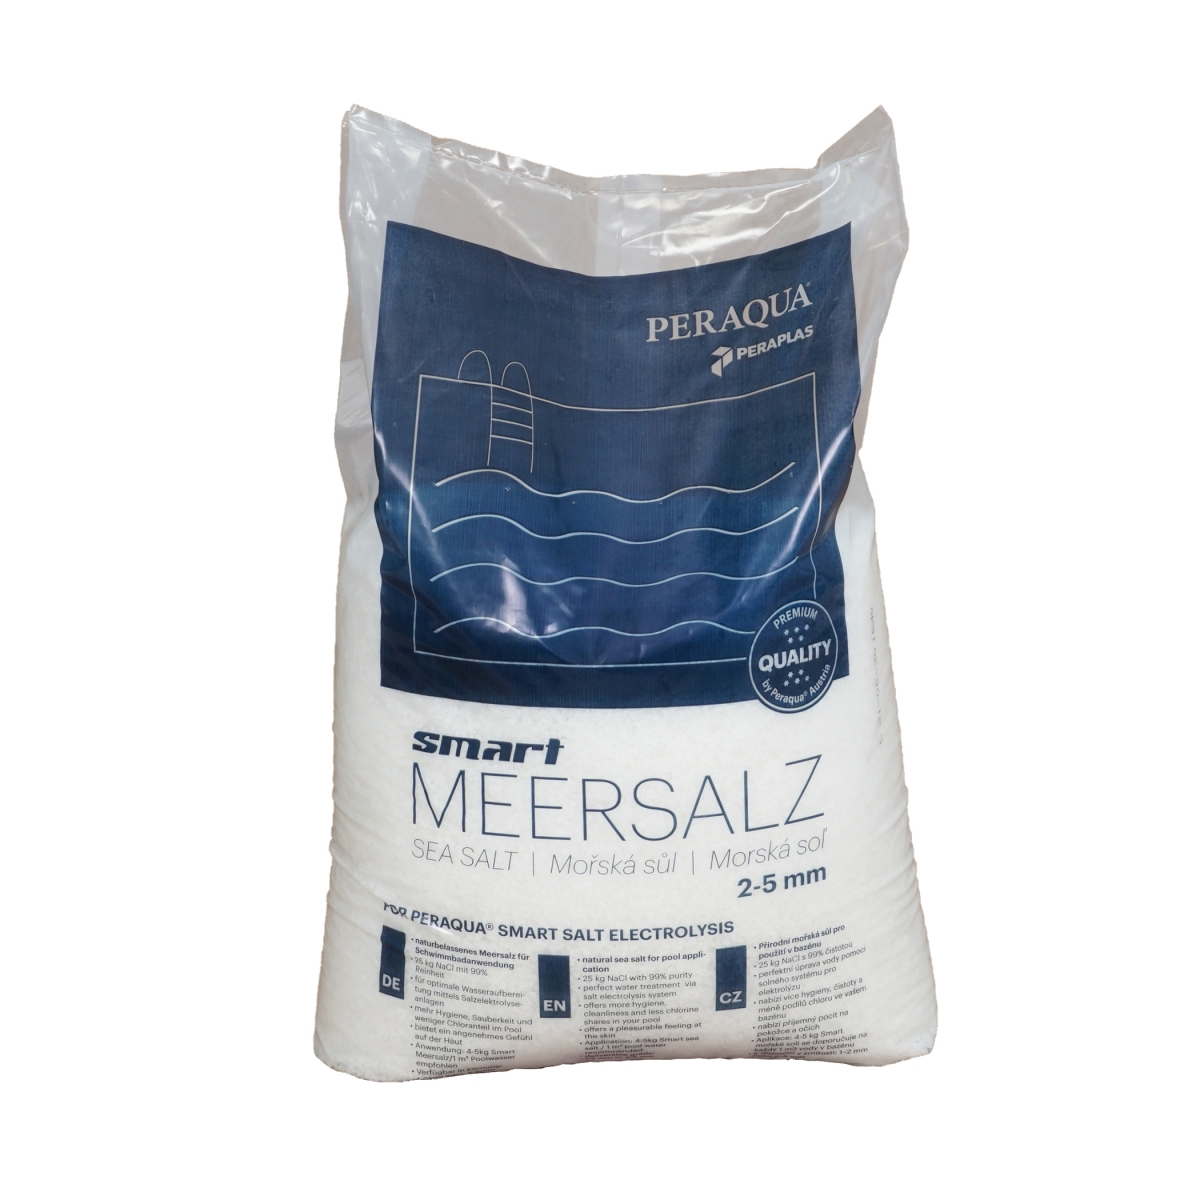 Smart Sea Salt 2-5mm Grade for usage in combination with Saltelectrolysis Systems for pool applications, 25 kg bag Smart Sea Salt 2-5mm Grade for usage in combination with Saltelectrolysis Systems for pool applications, 25 kg bag